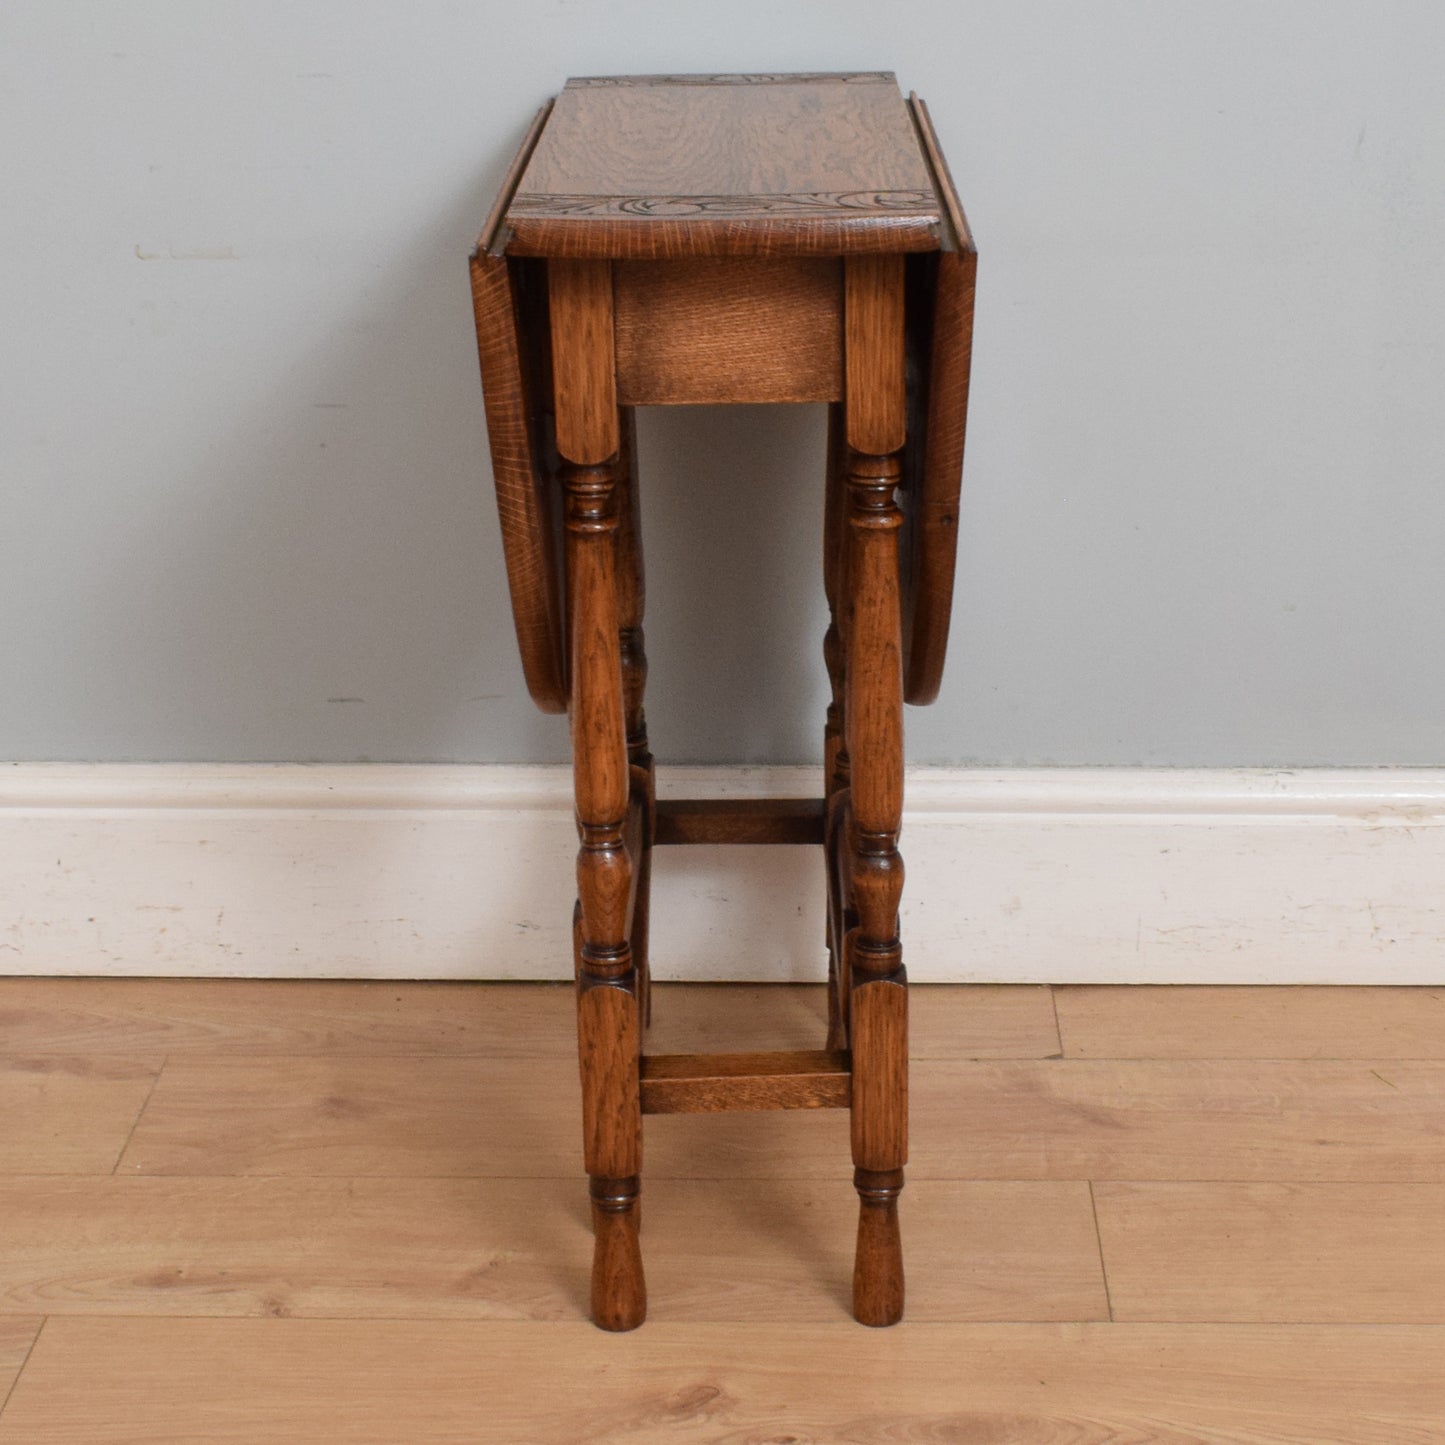 Small Carved Drop-Leaf Table